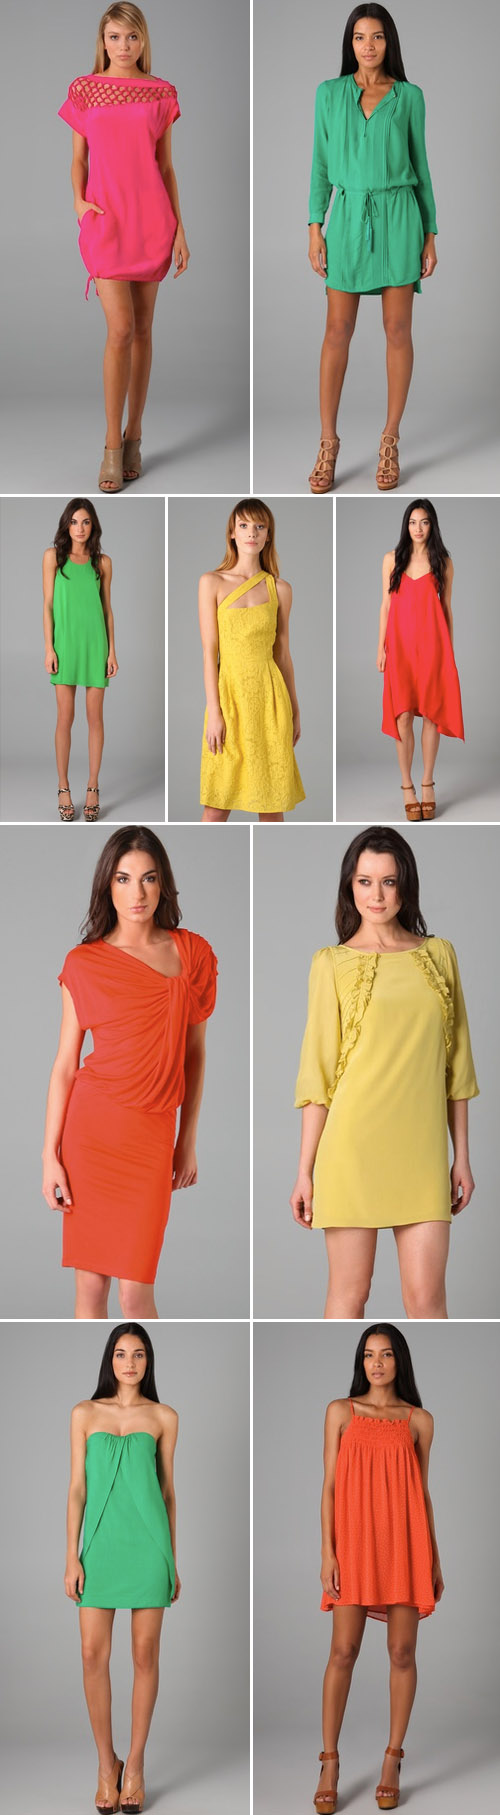 bright color spring and summer dresses from Shopbop.com